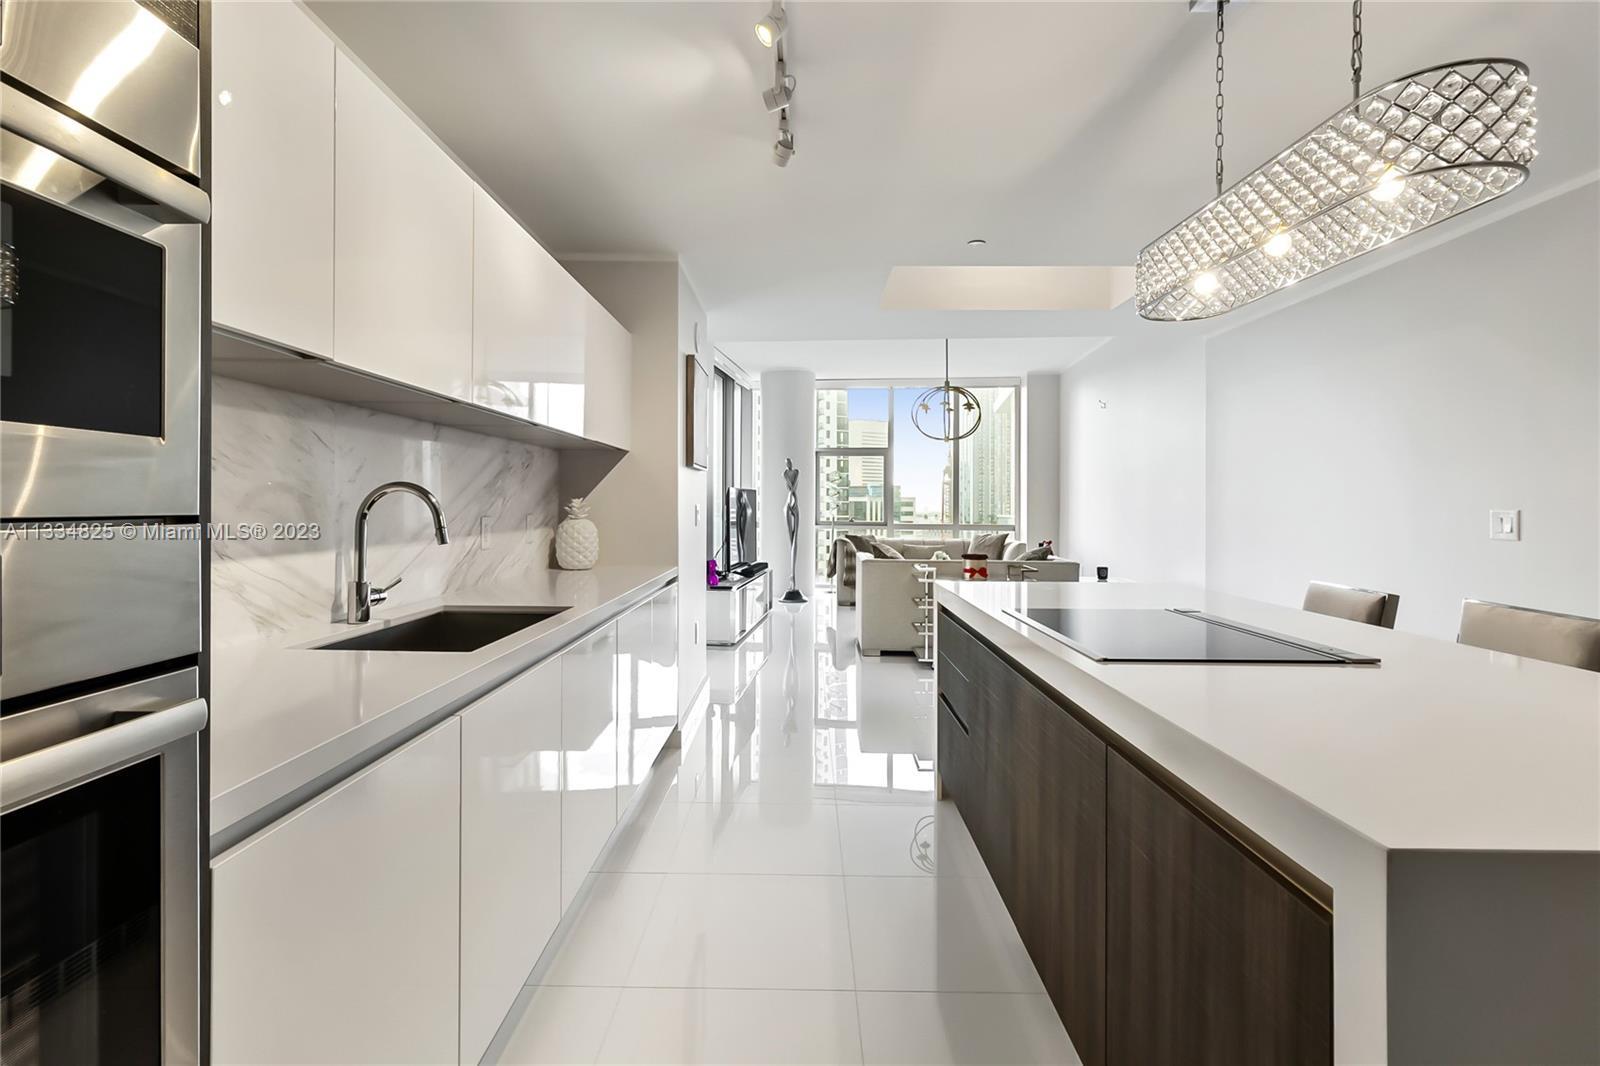 SE-Corner 3 bed PLUS DEN/ 4 bath Residence, 10 Ft ceilings w/private elevator foyer at the Miami Par